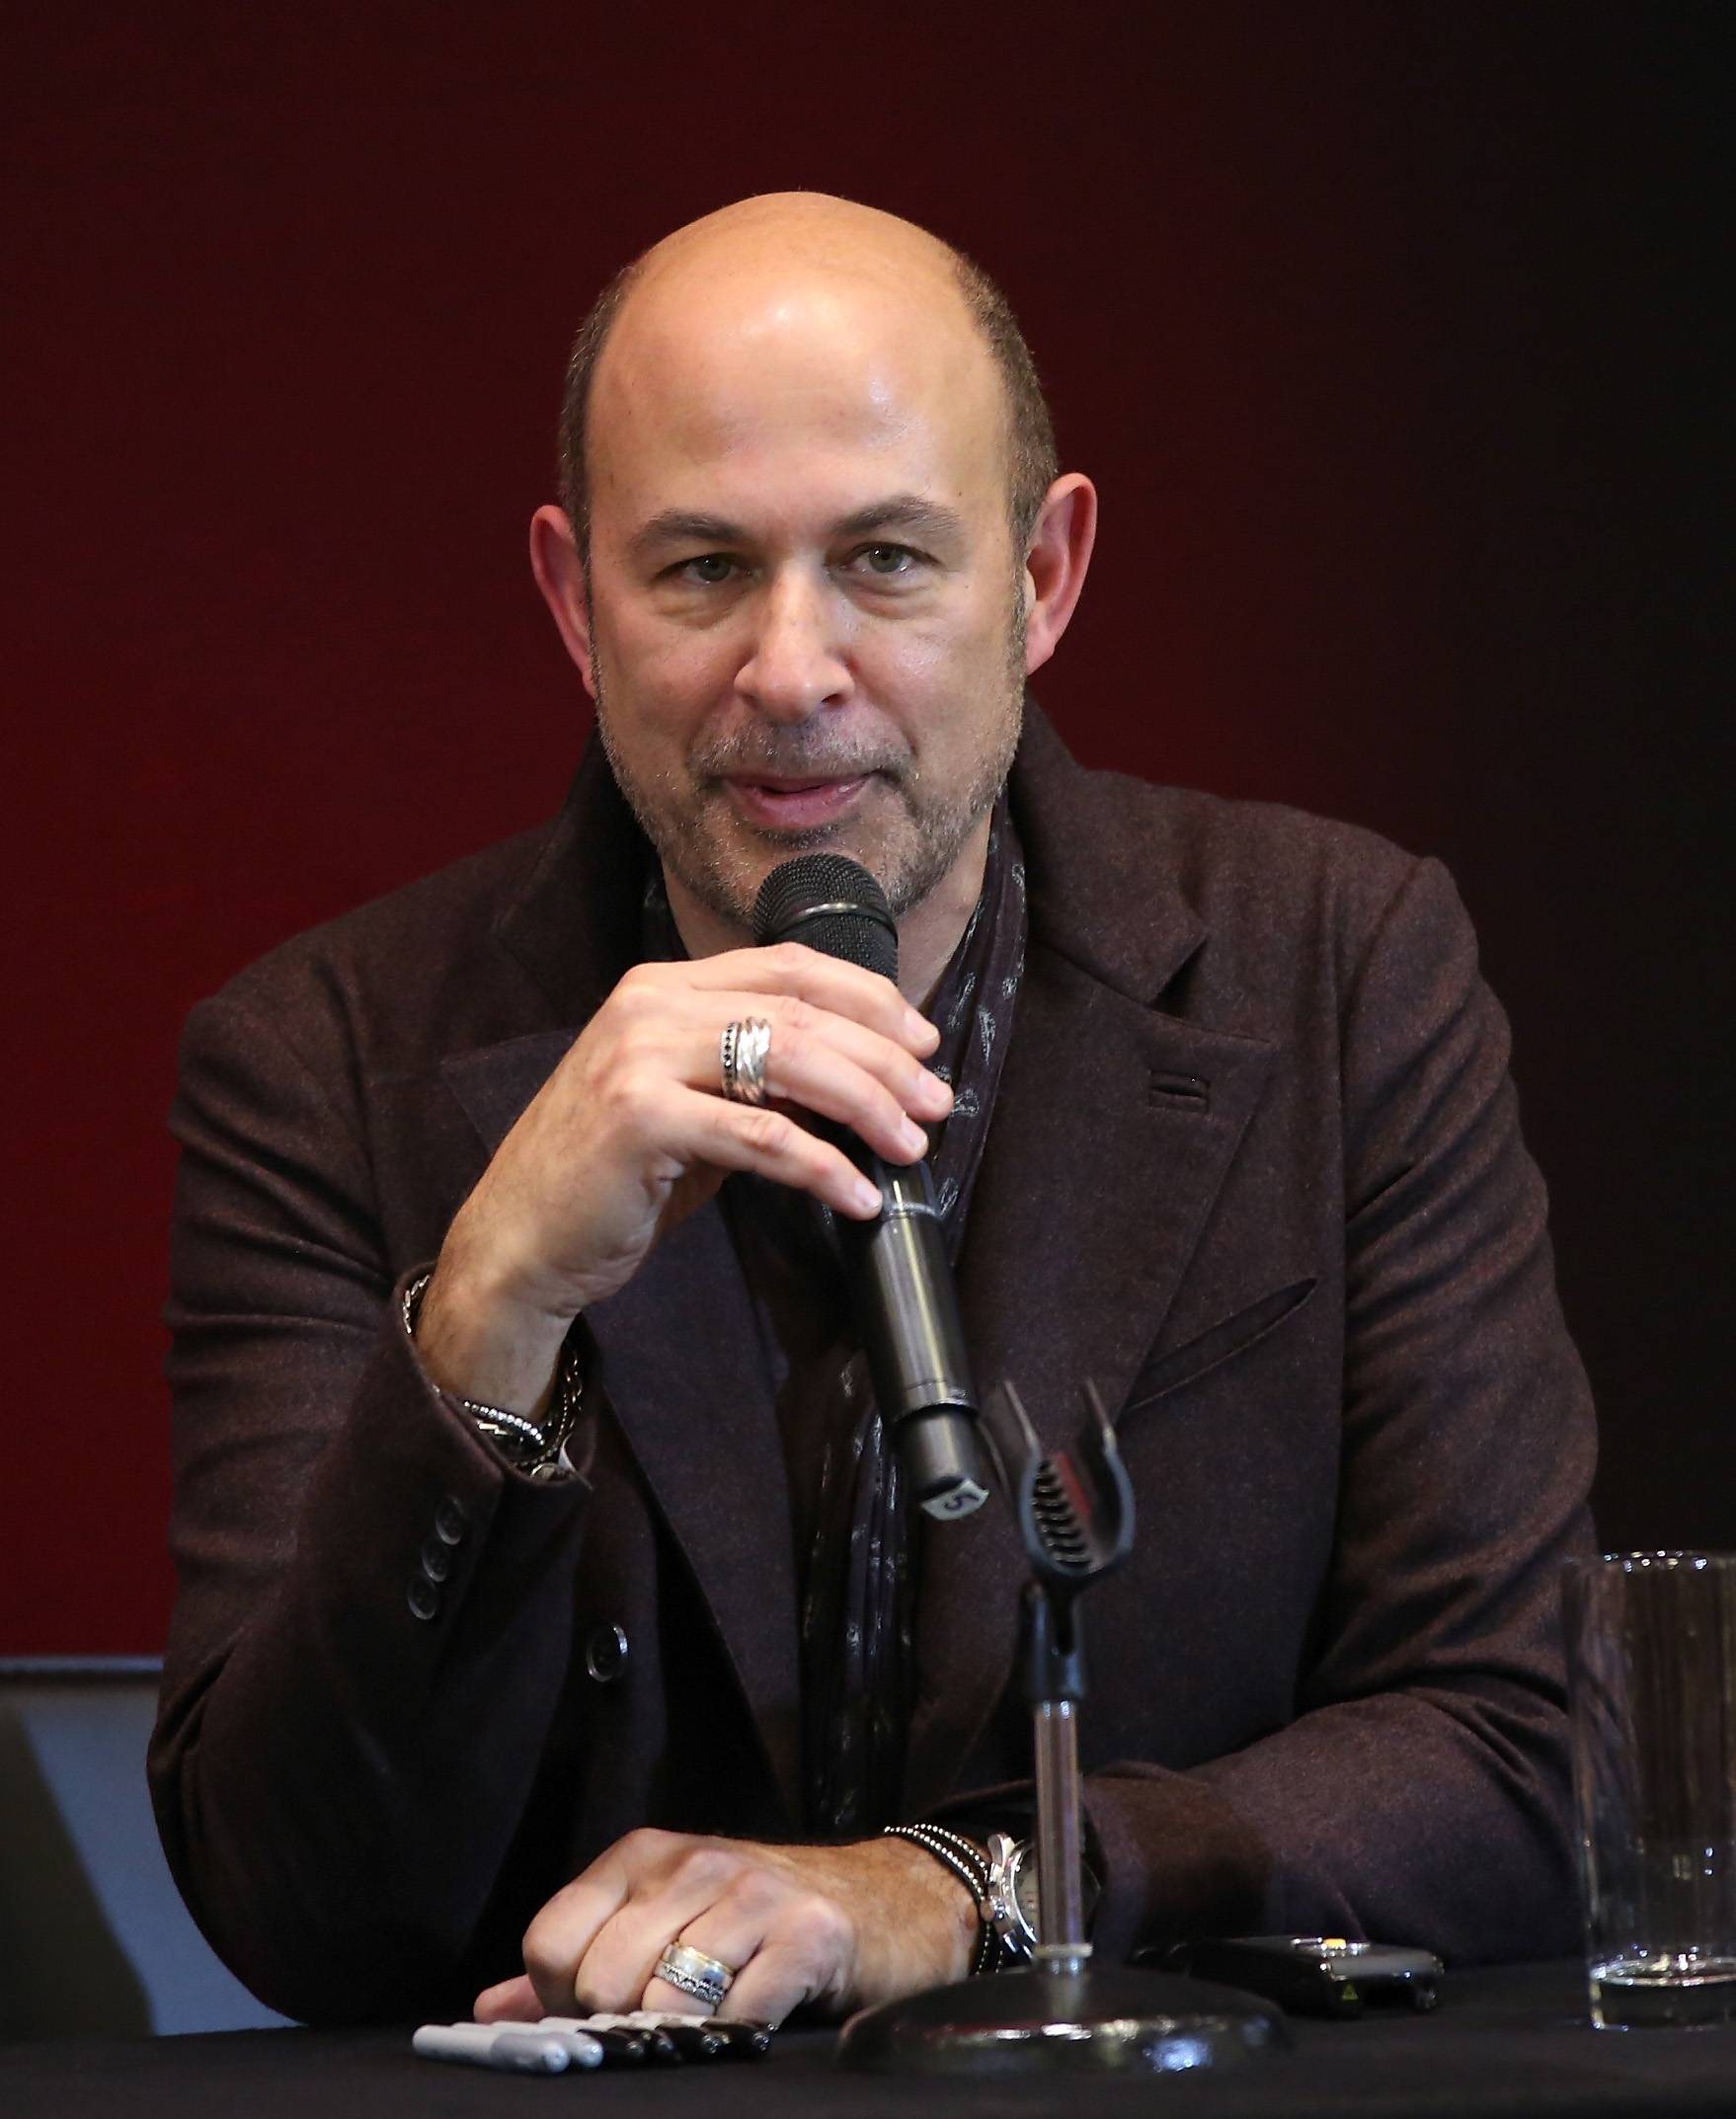 Neiman Marcus Welcomes John Varvatos To Celebrate The Launch Of His Book 